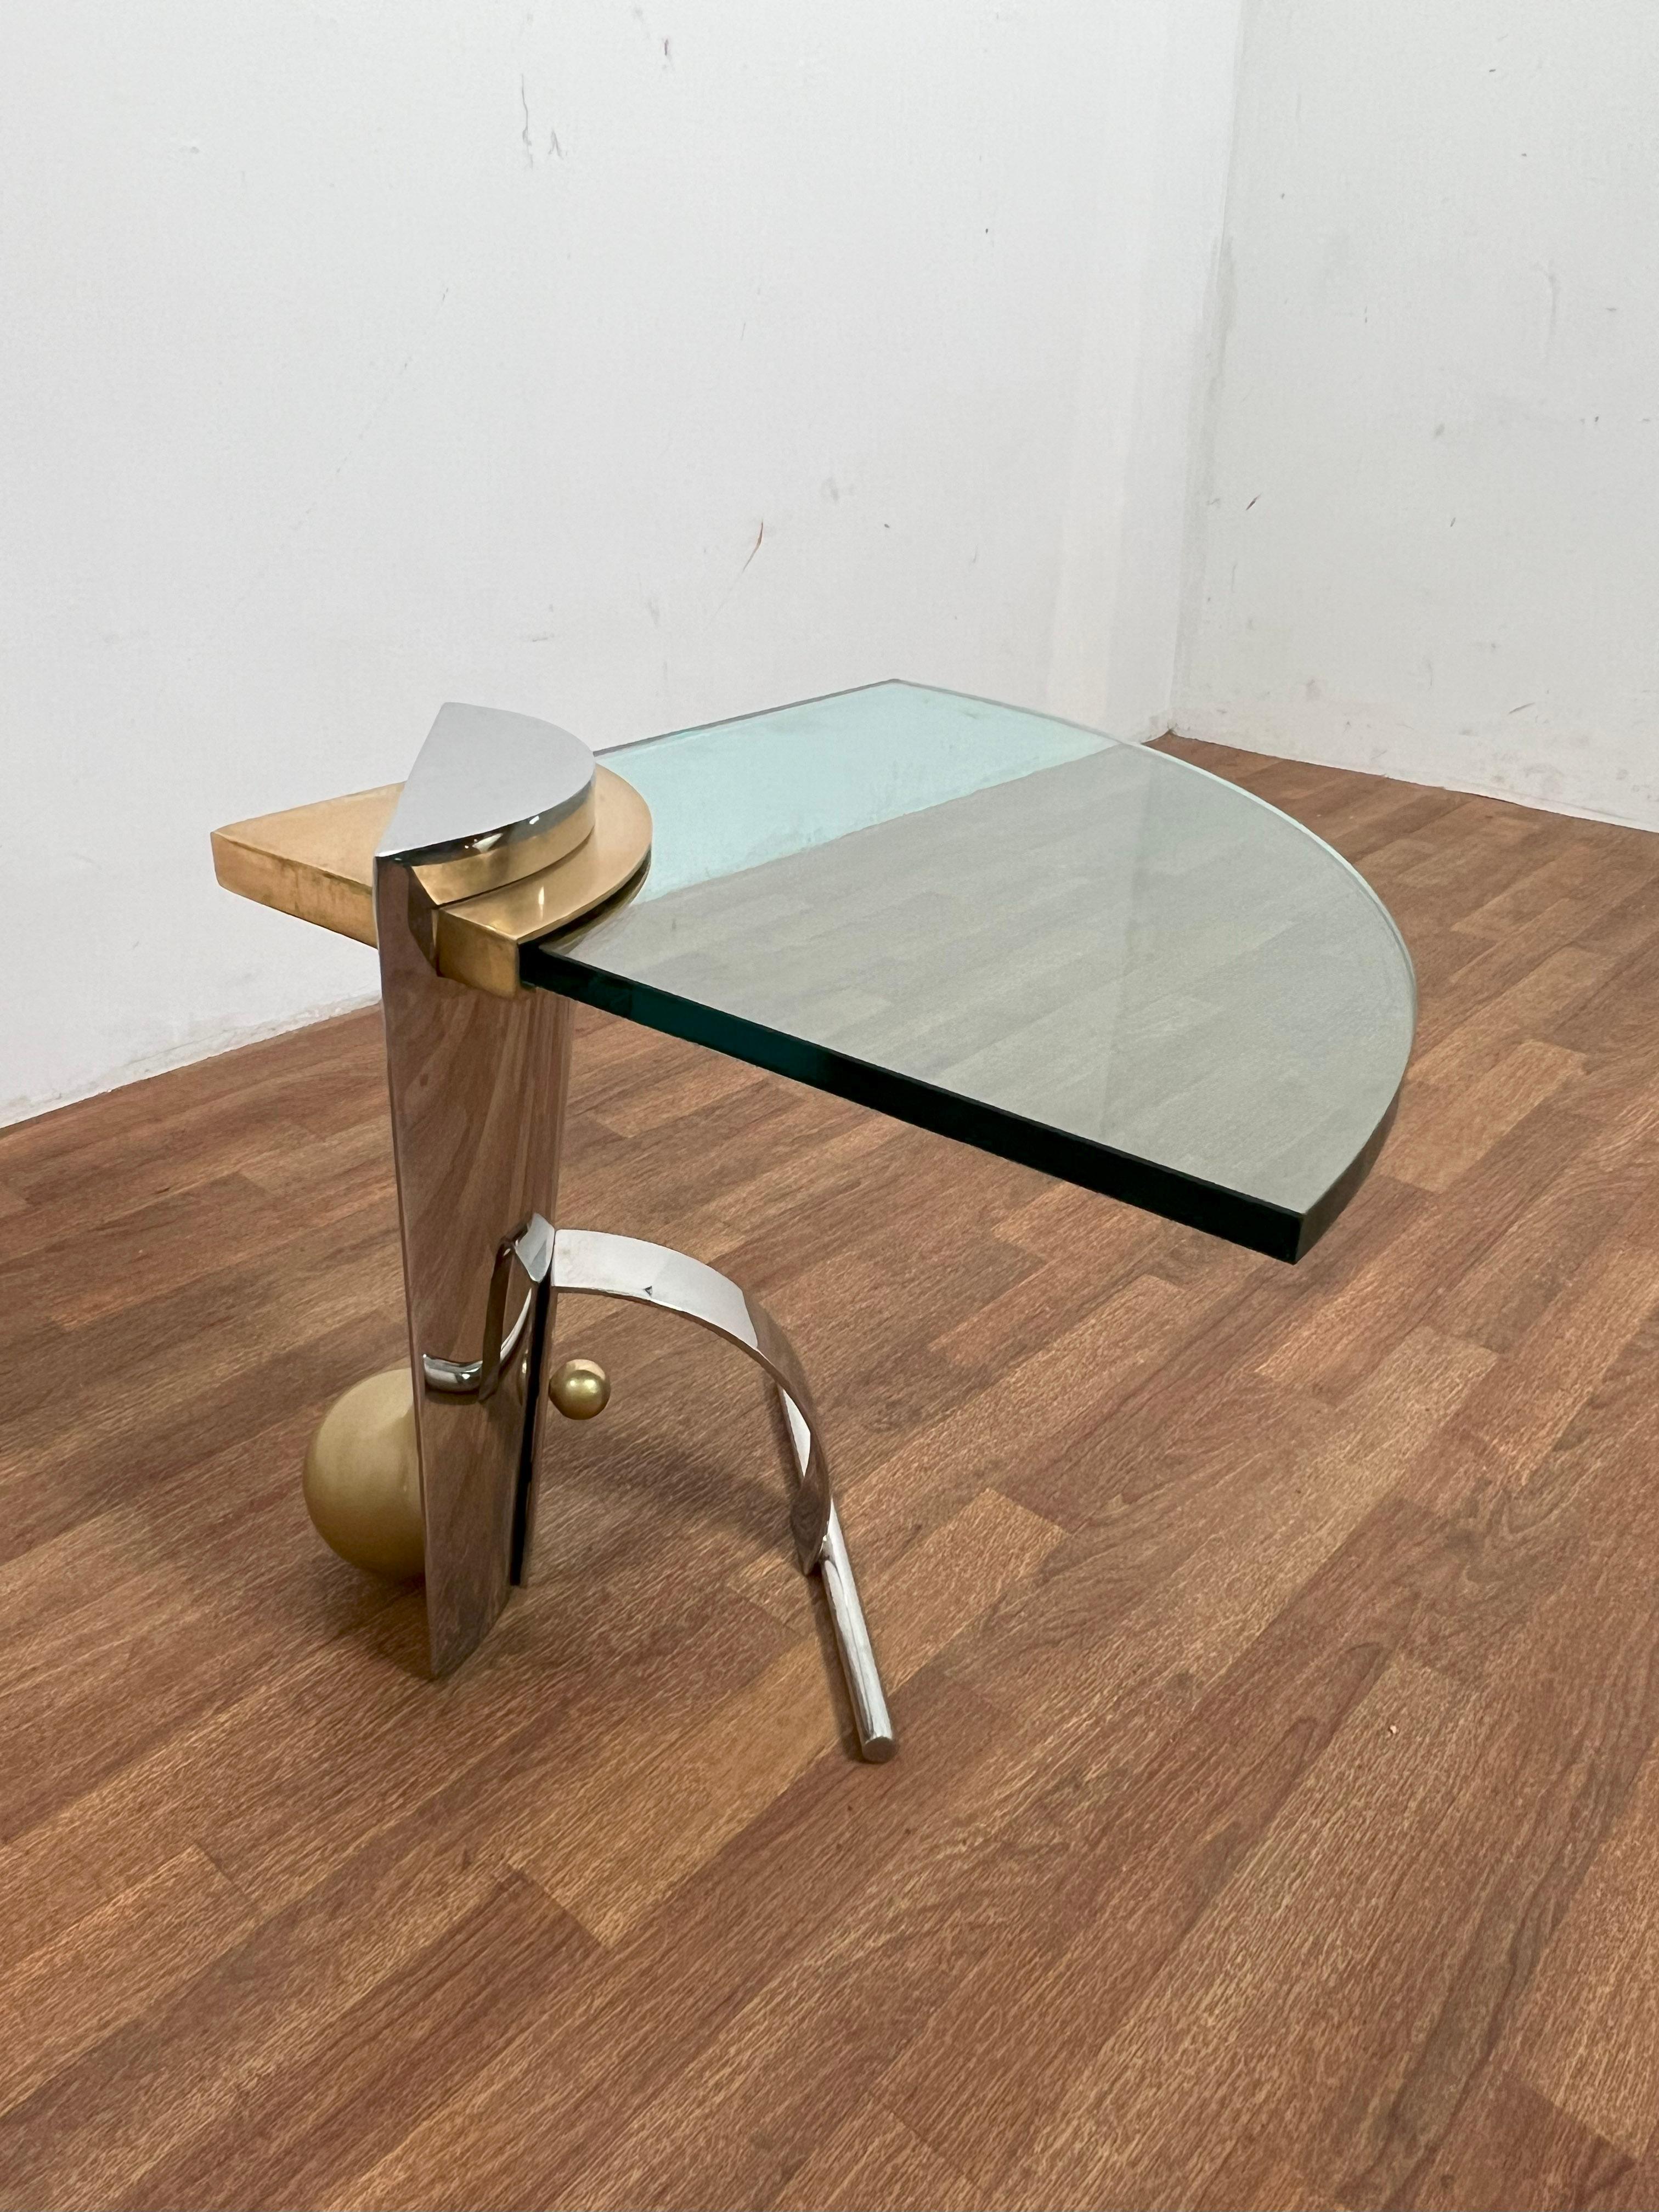 Late 20th Century Post Modern Cantilevered Side Table in Manner of Karl Springer C. 1980s For Sale